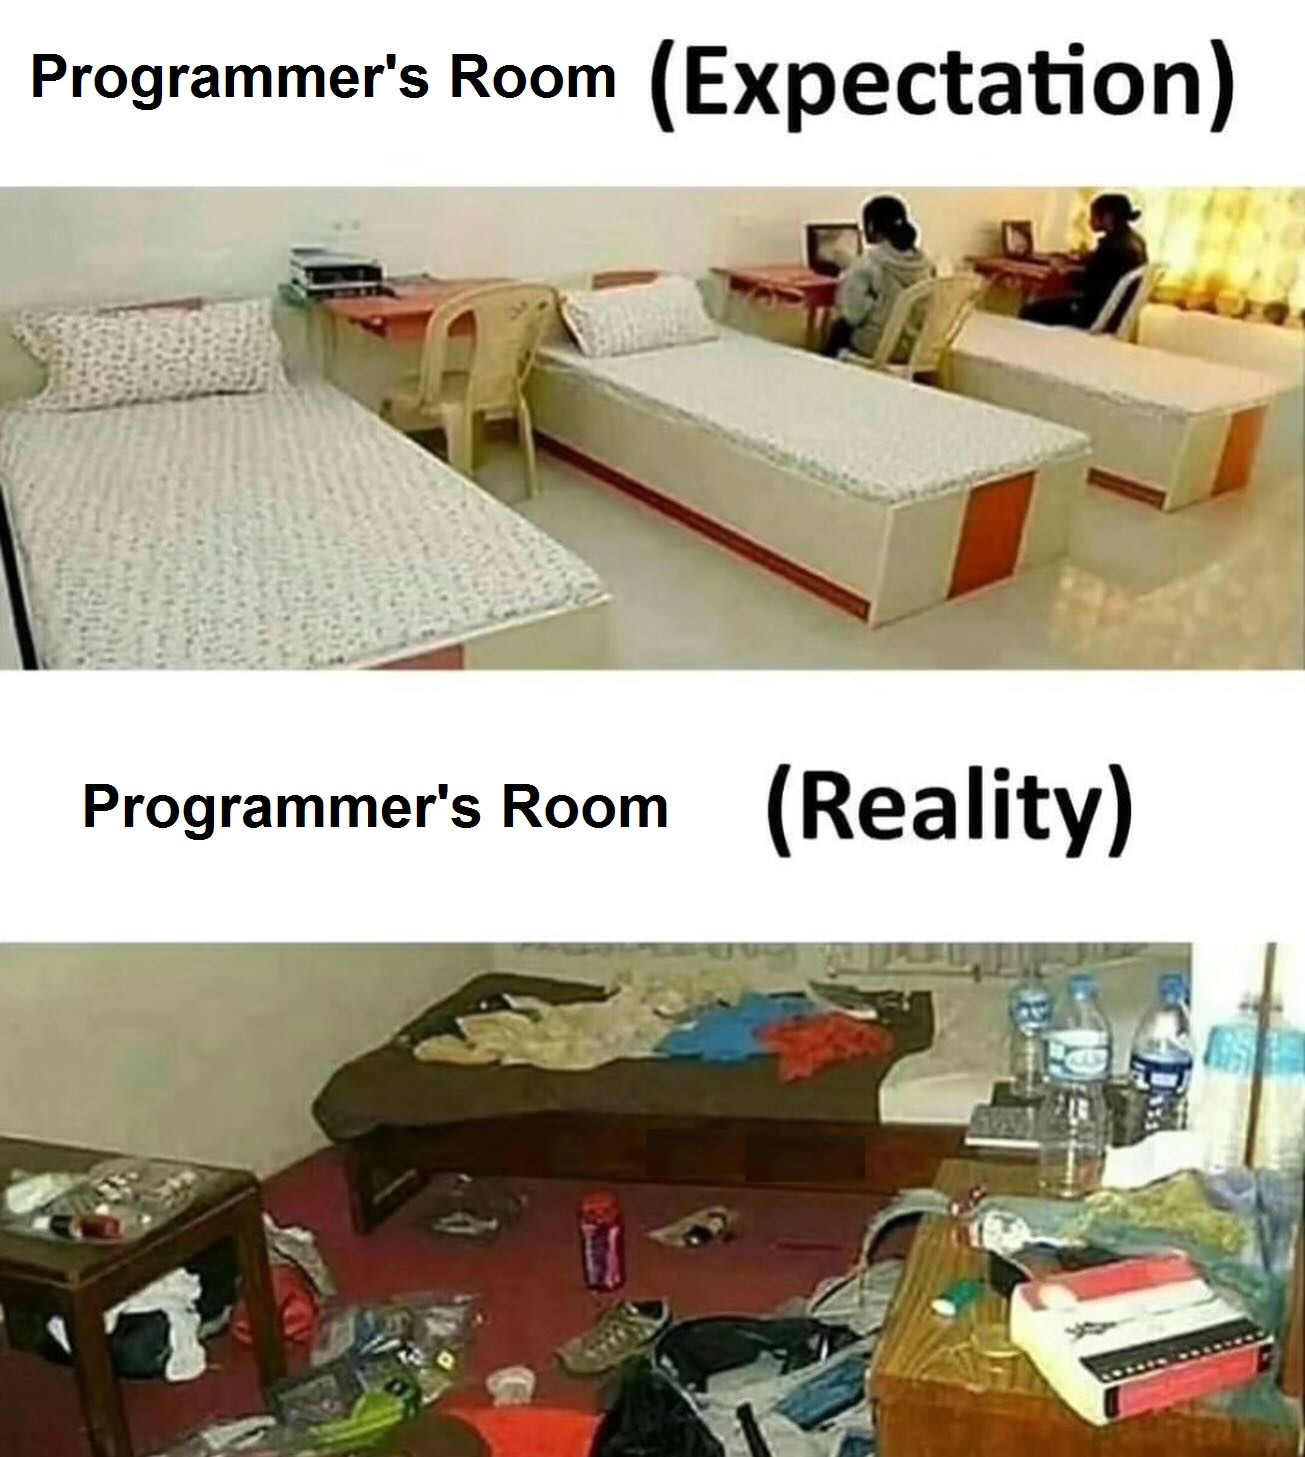 Programmer's Room Expectation & Reality